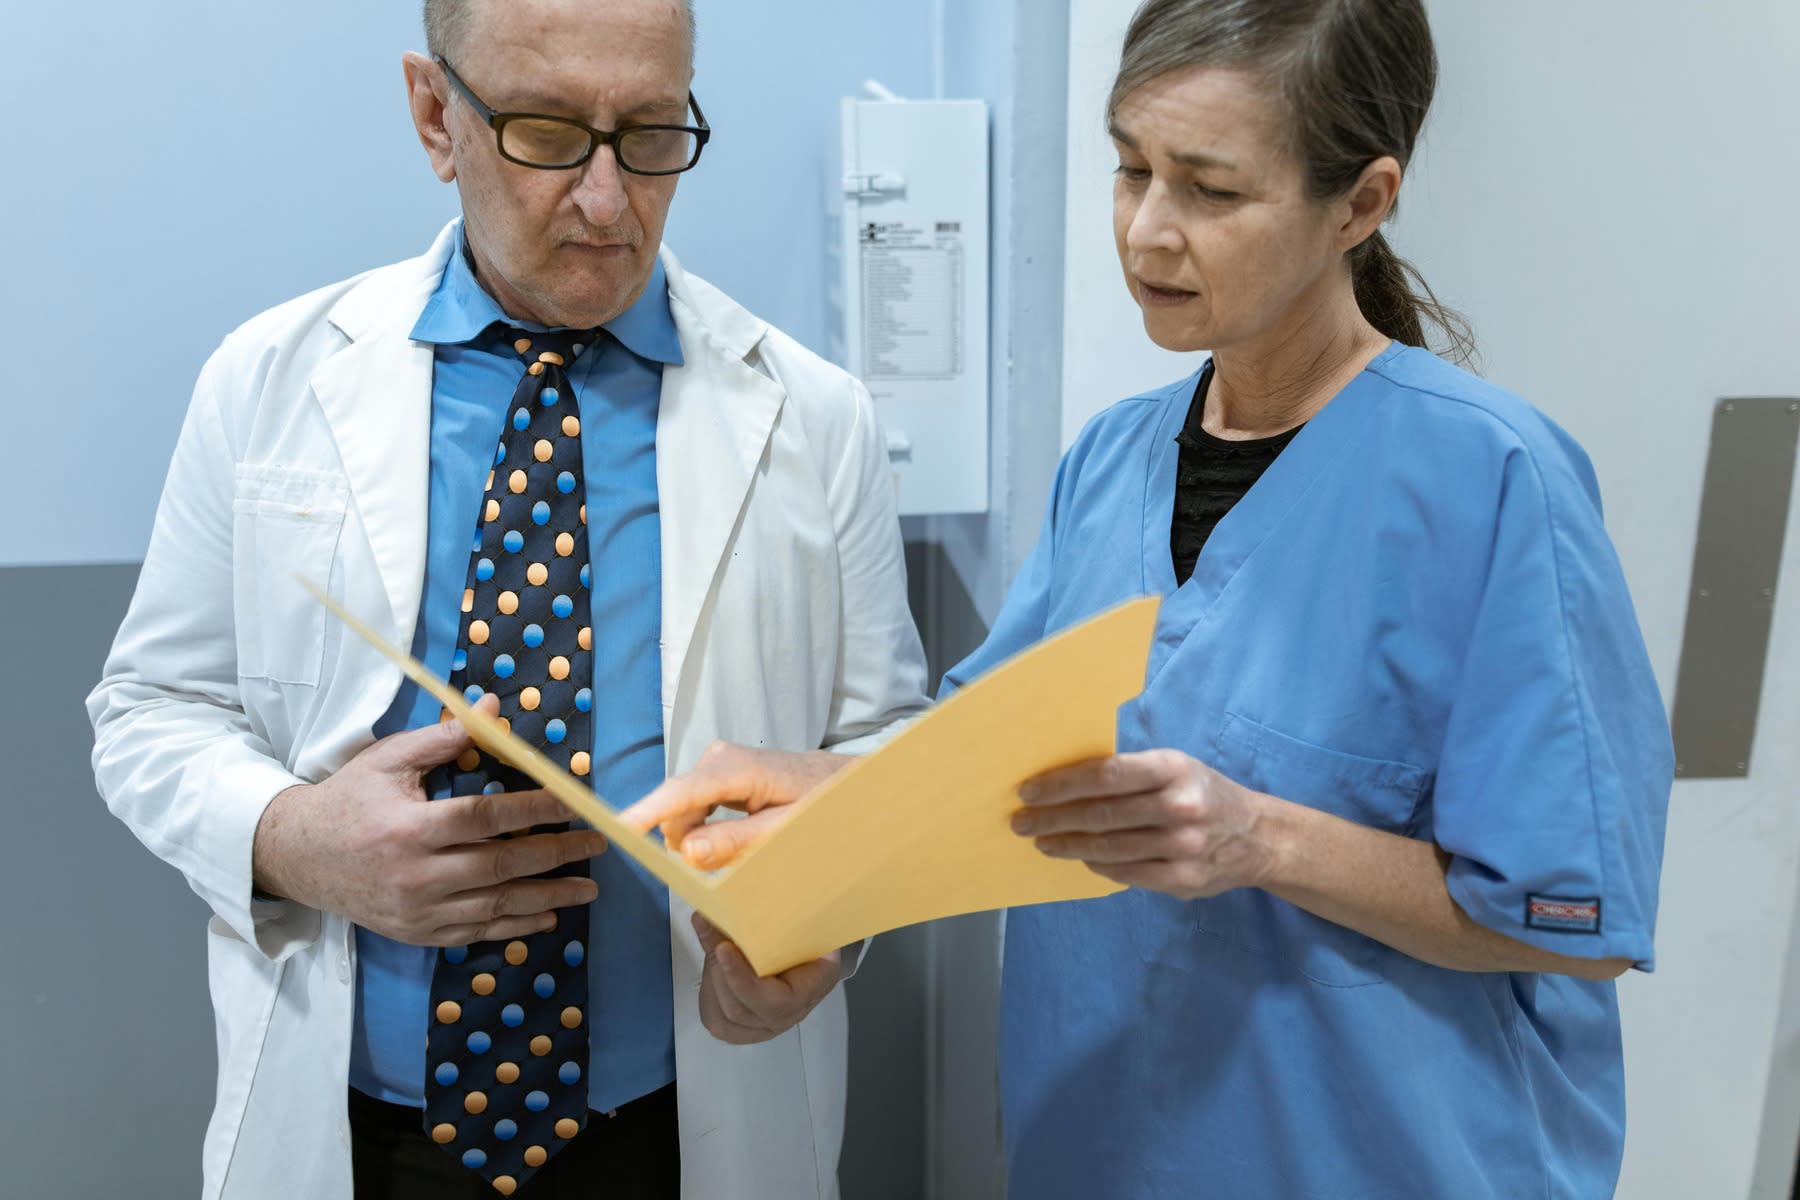 Nurse showing a file folder to a doctor